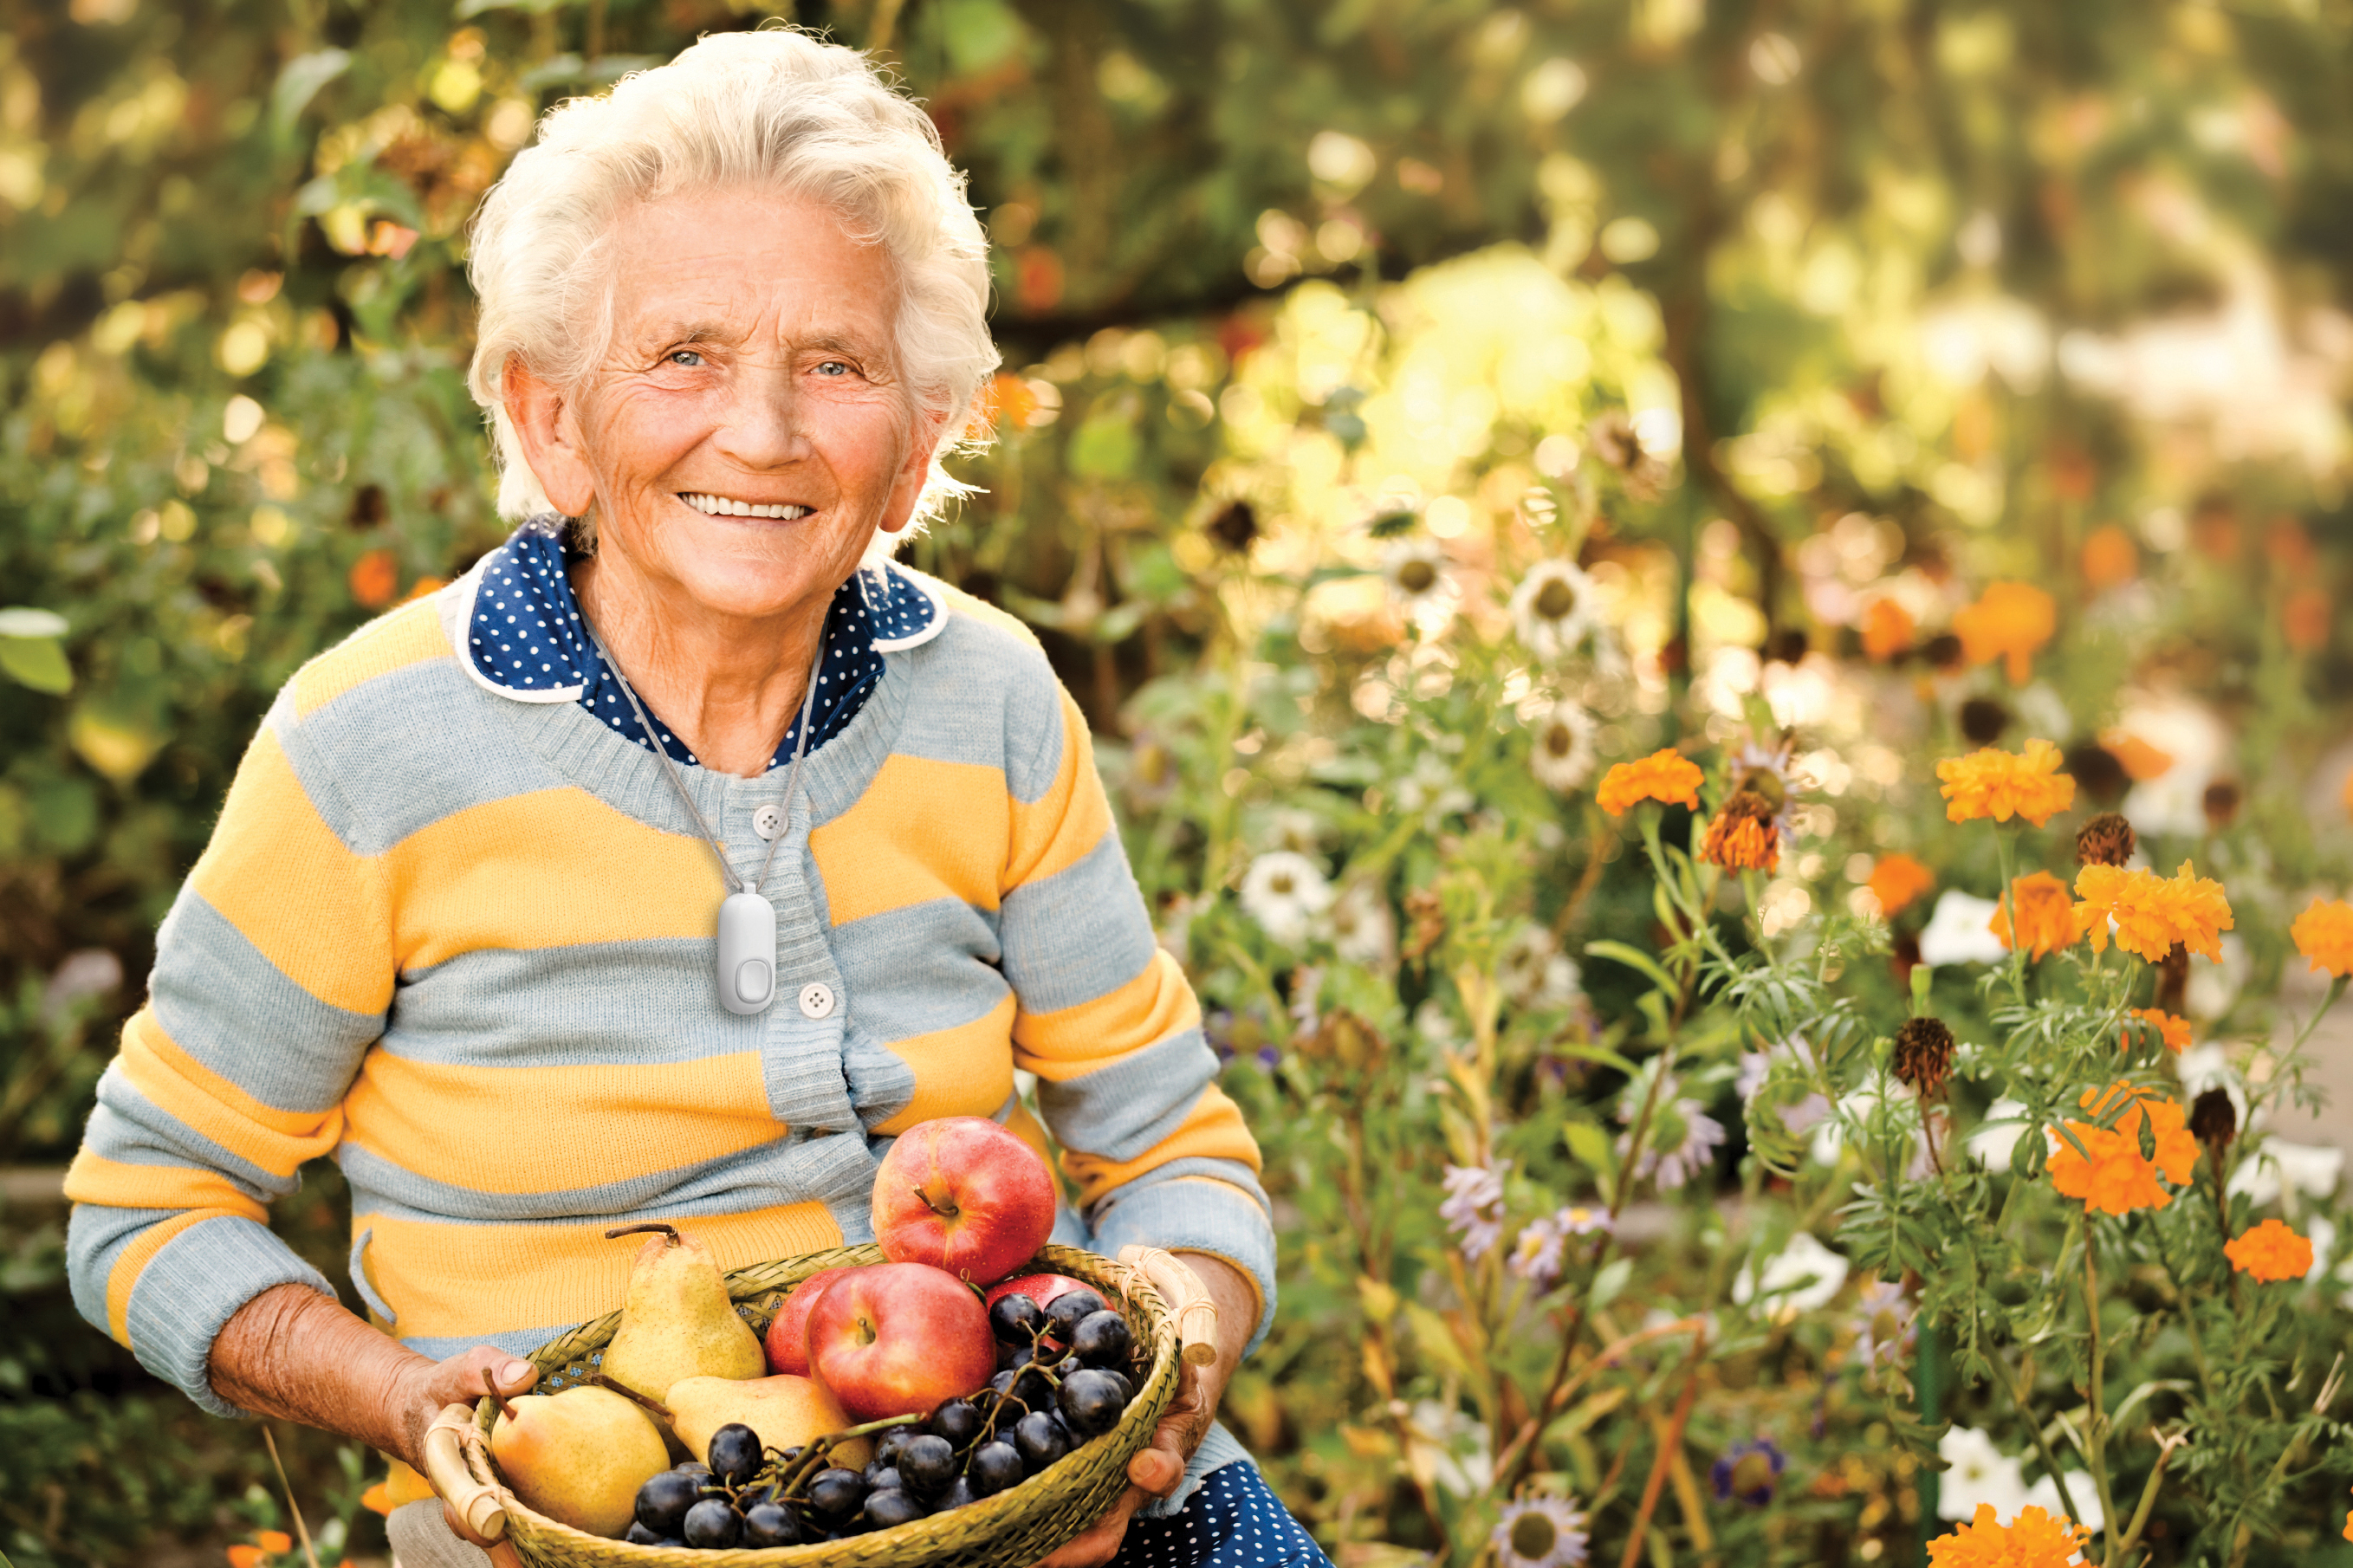 Smiling older woman wearing the Auto Alert fall detection button sitting in a field of flowers holding a basket of fruit.